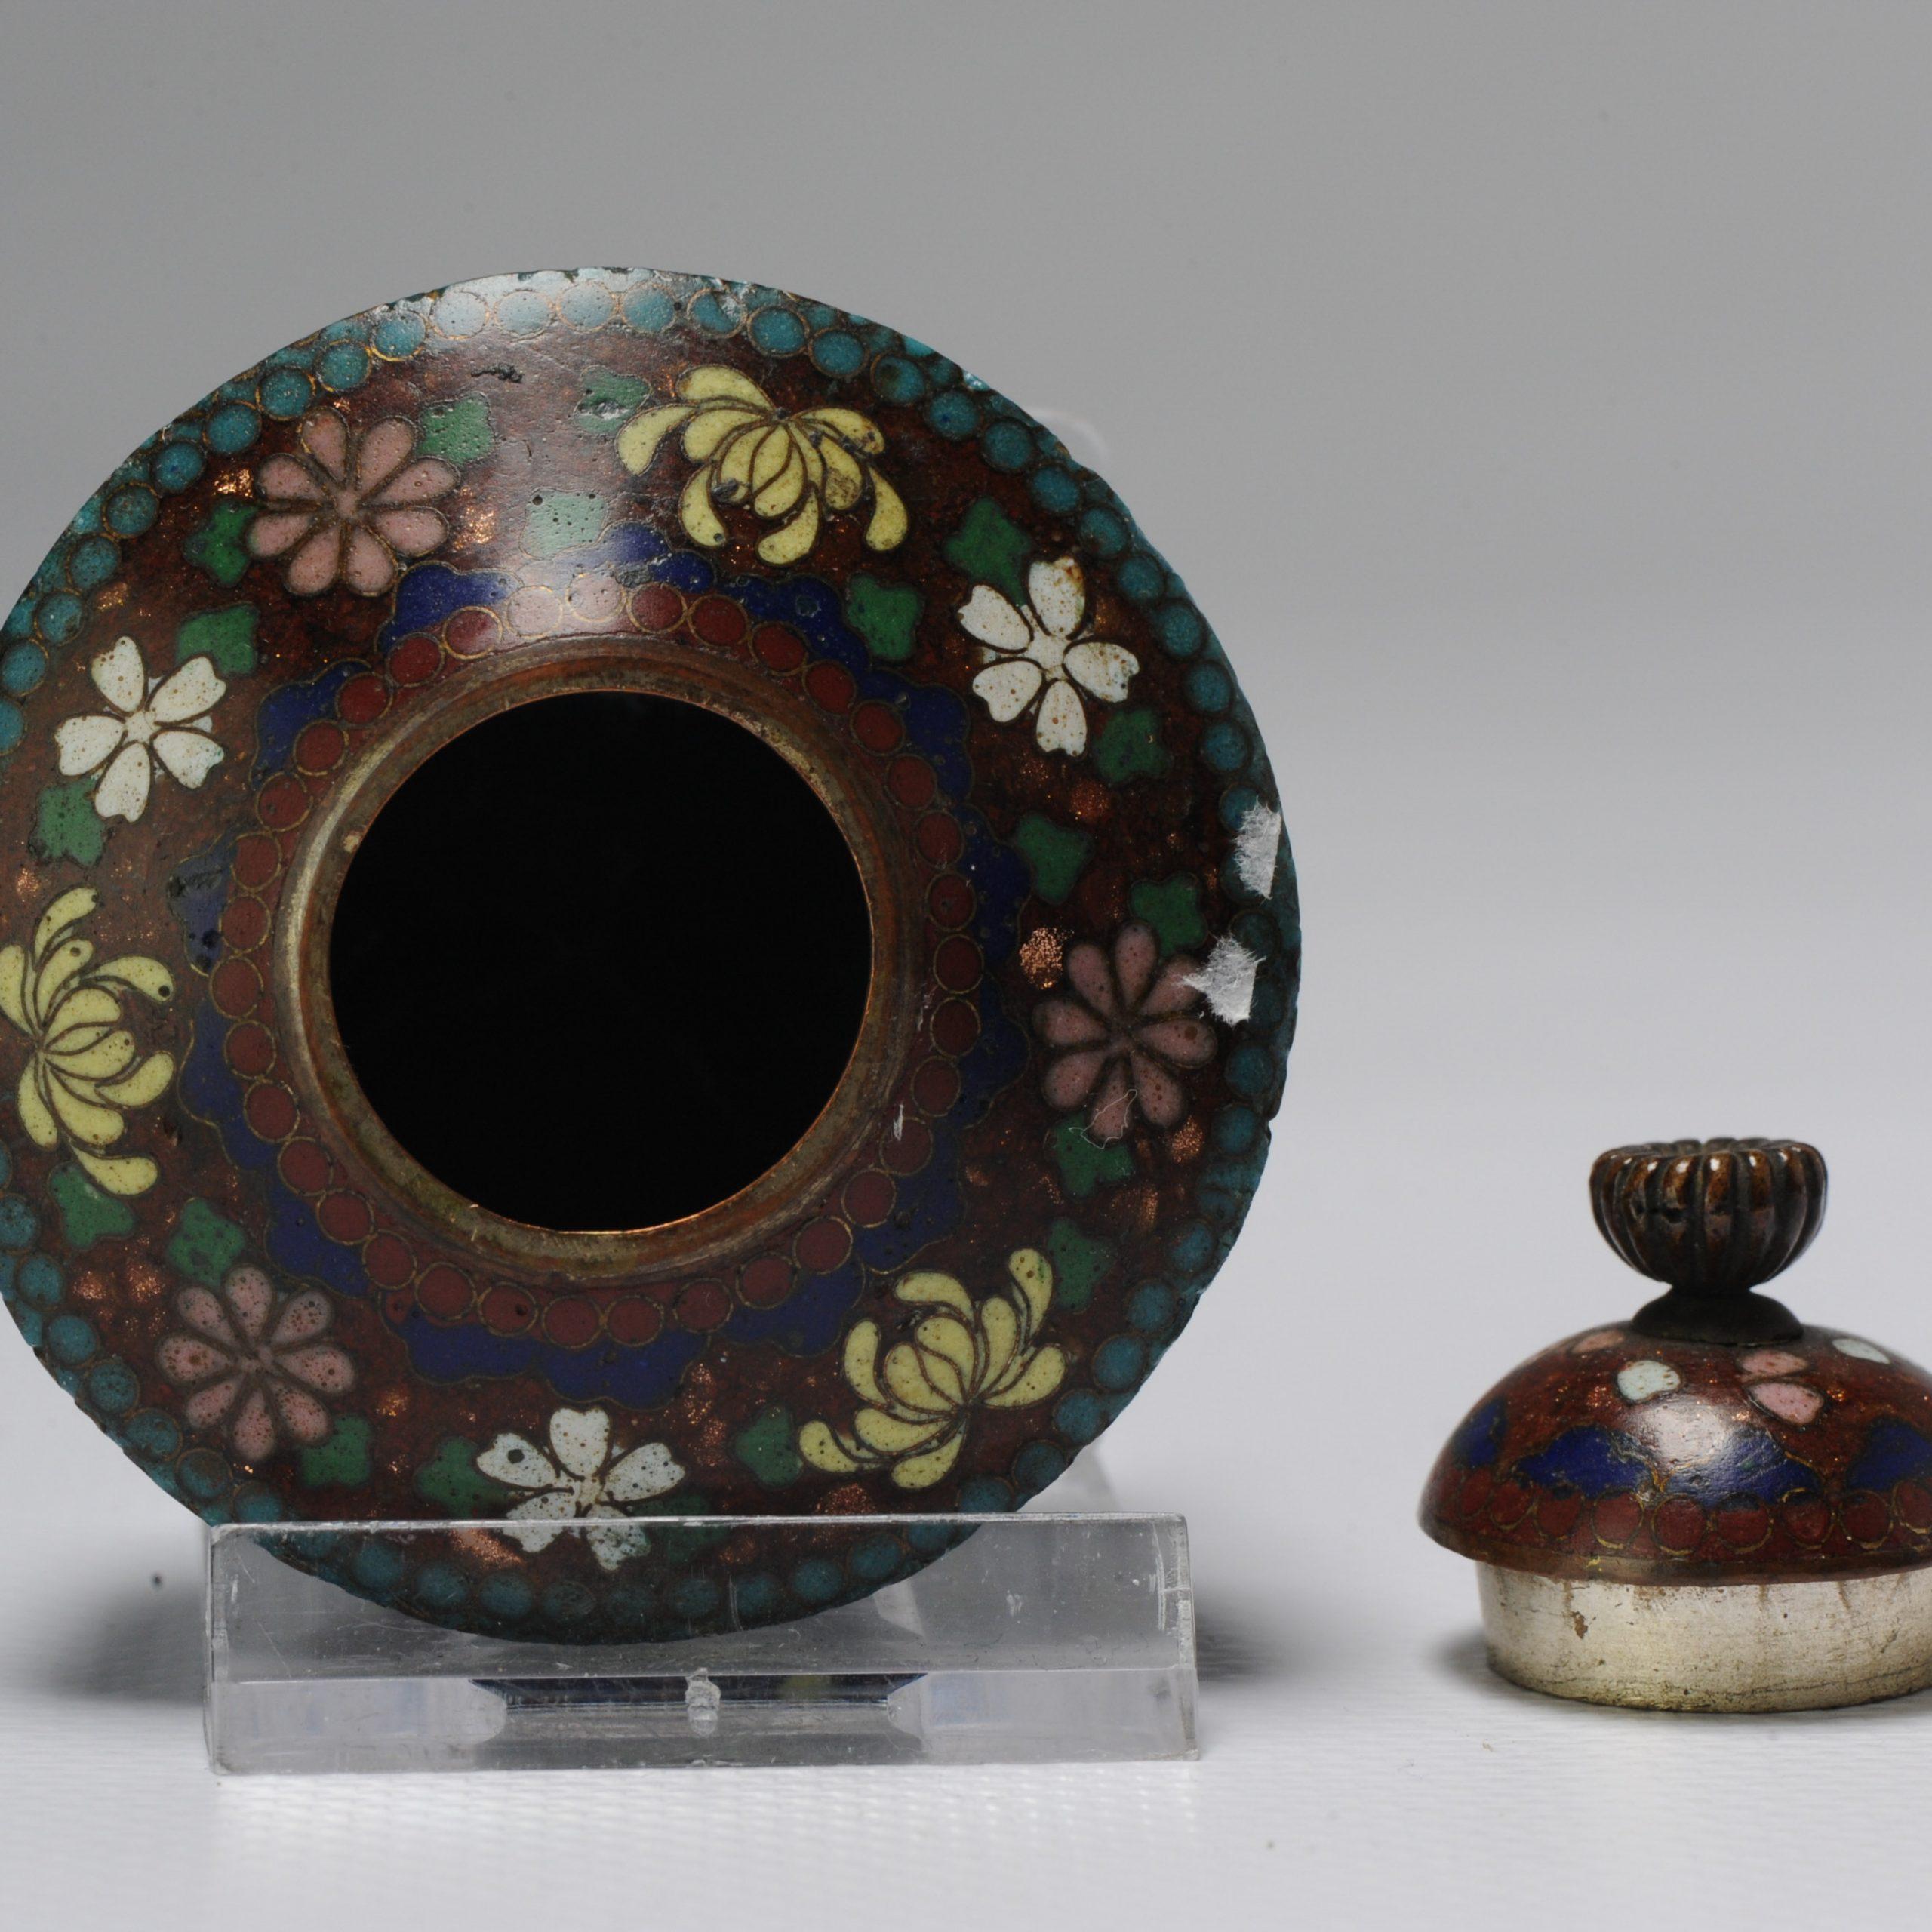 Lovely Antique Meiji Period Japanese Koro Bronze Cloisonne, 19th Century In Good Condition For Sale In Amsterdam, Noord Holland